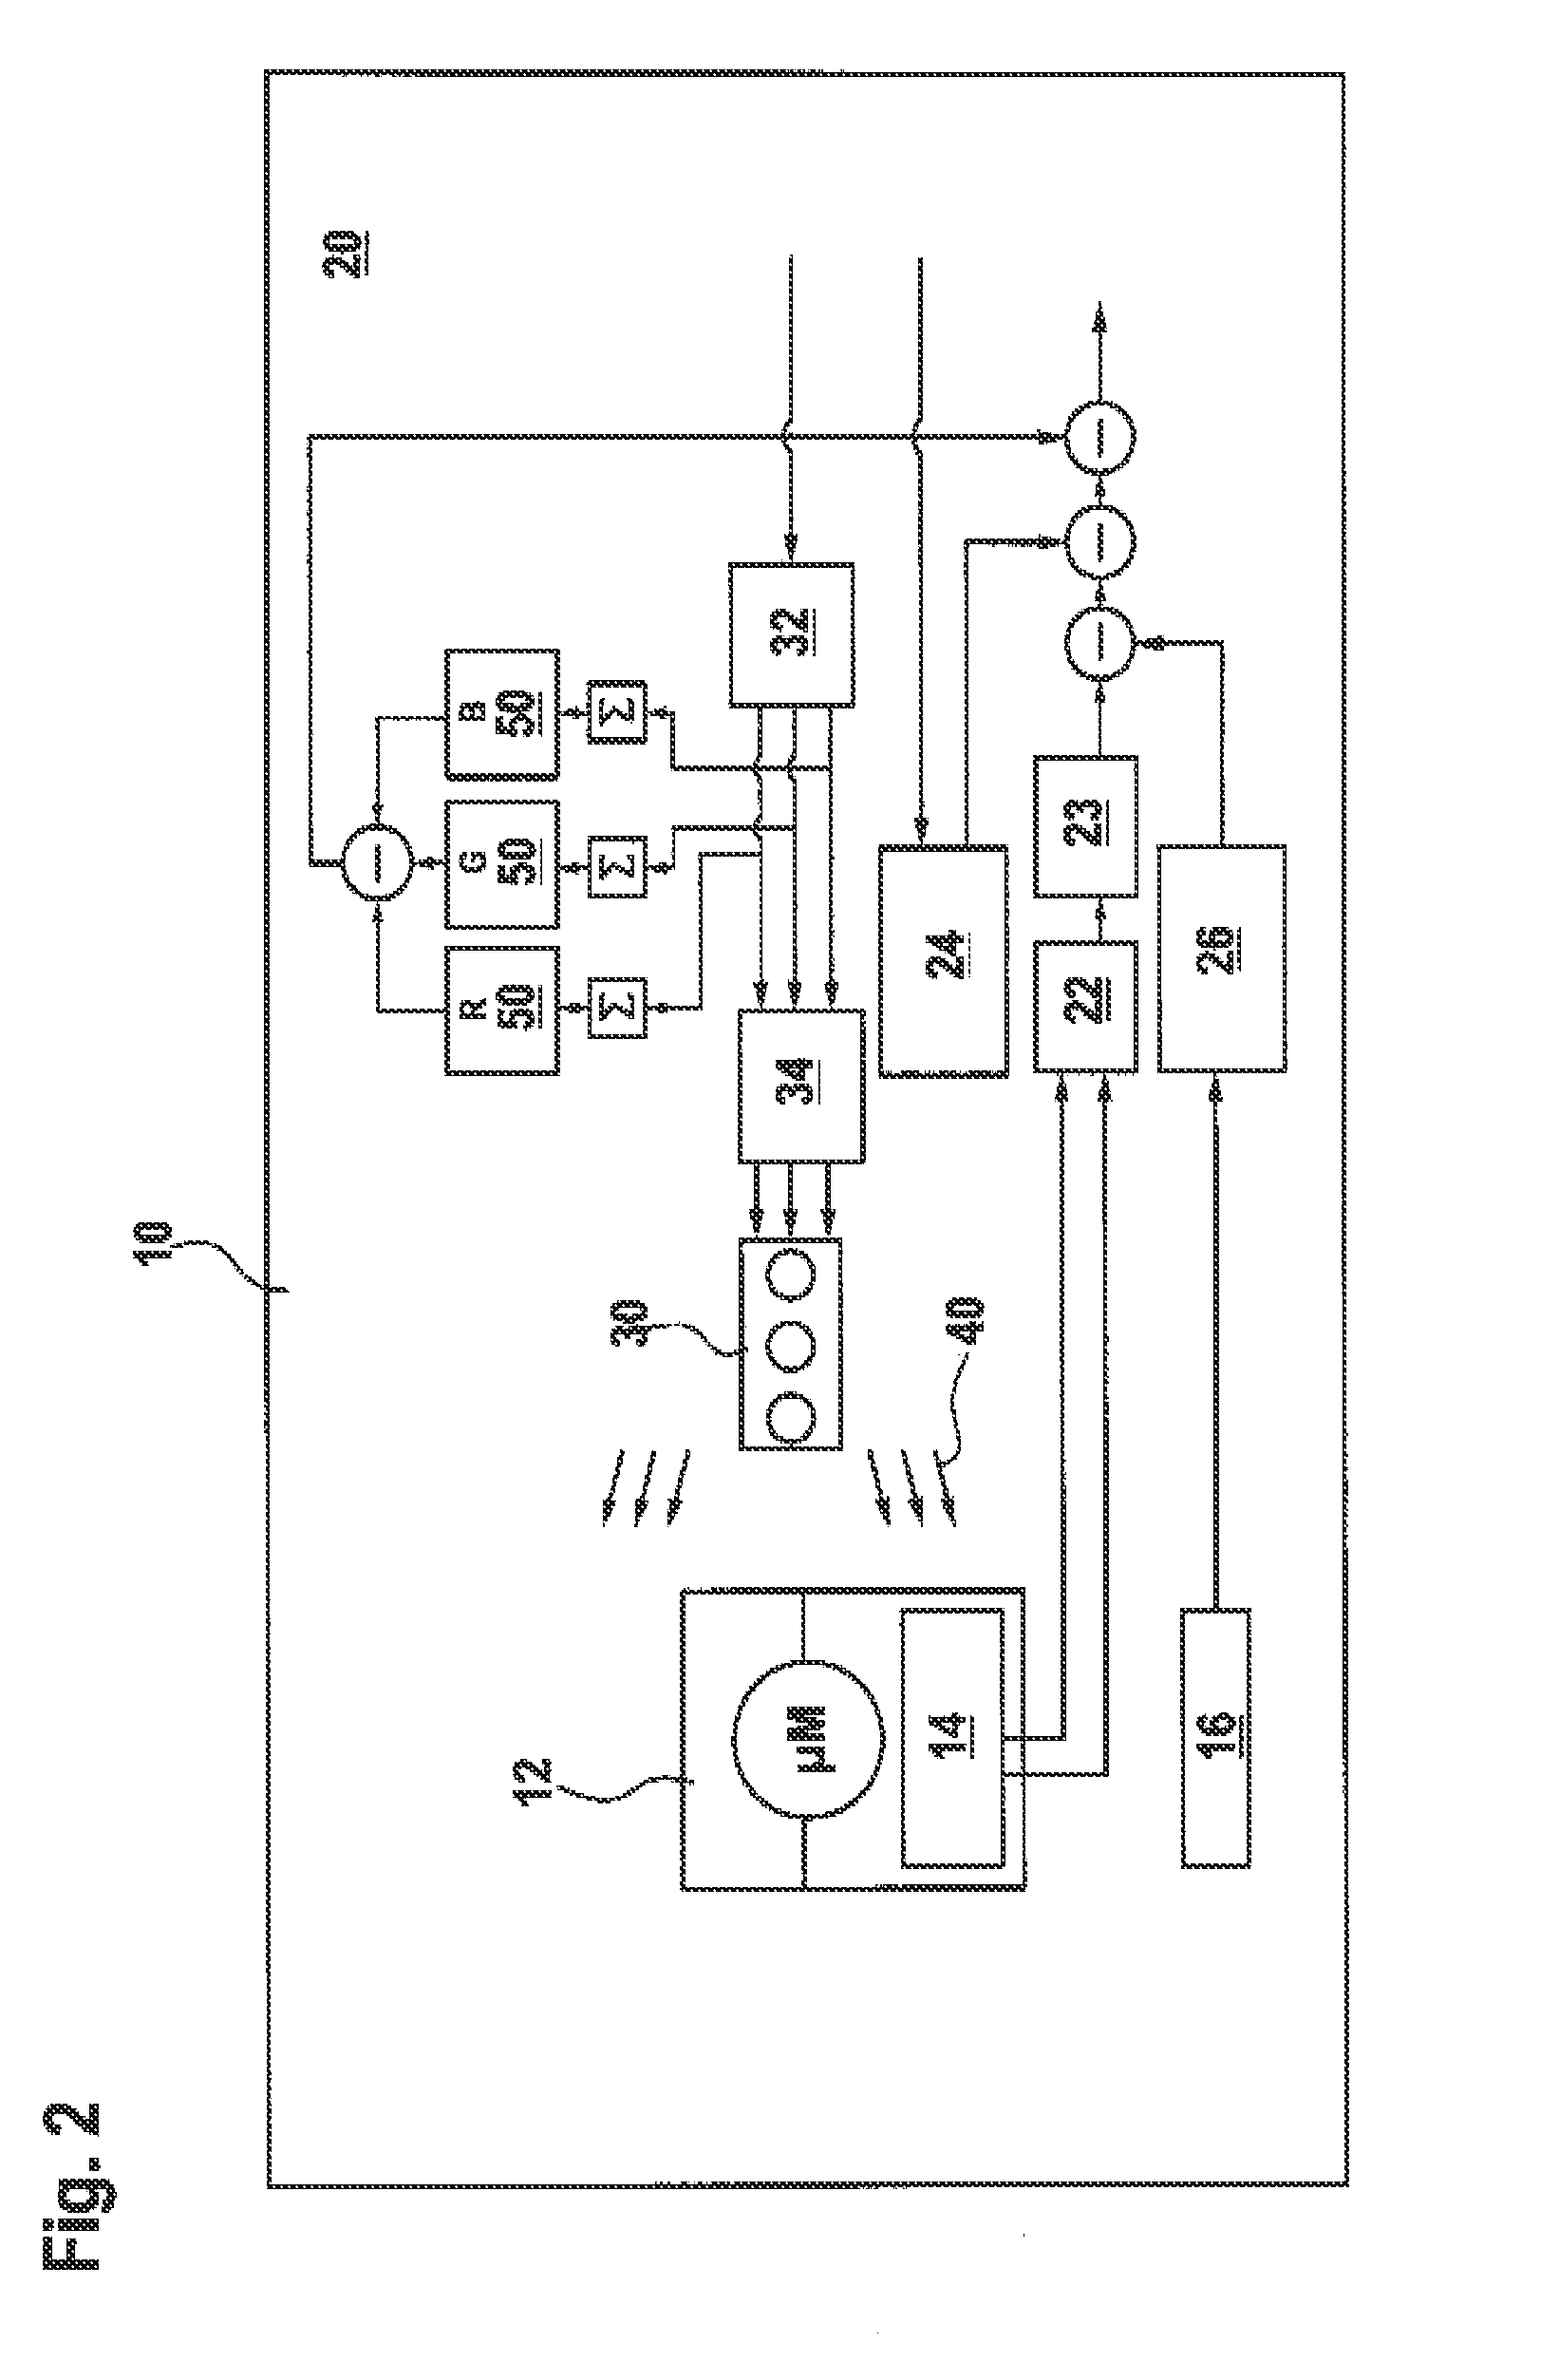 Micro-mirror system and associated control method